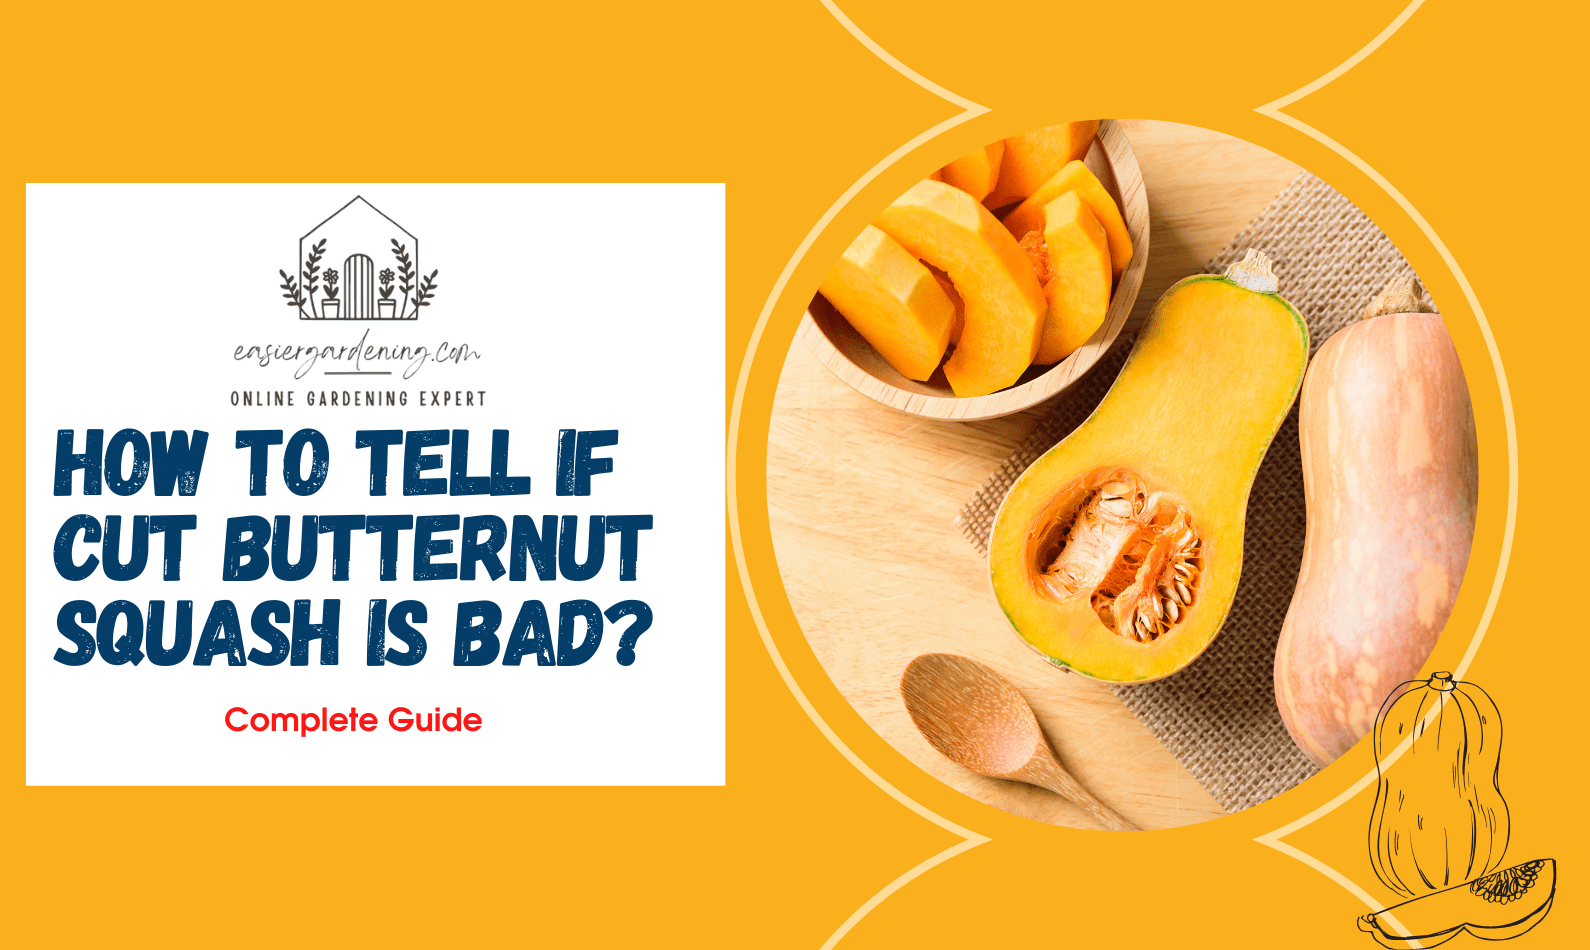 How to Tell If Cut Butternut Squash Is Bad?